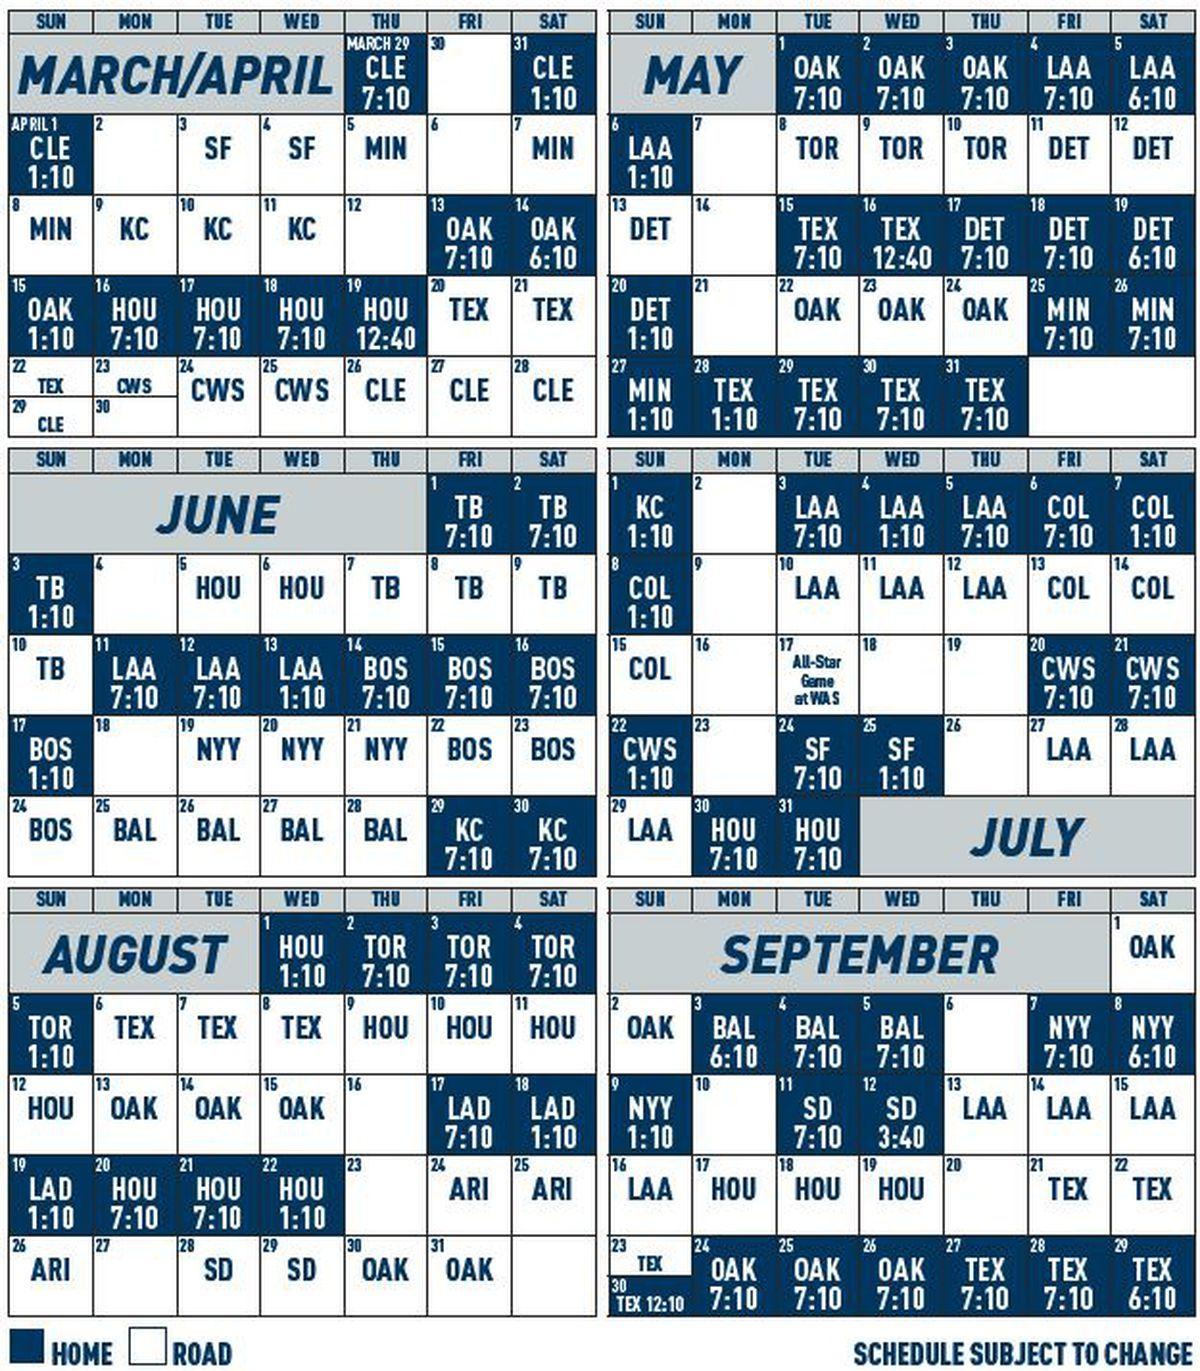 Gazing Into the Known Unknown: the 2018 Seattle Mariners Schedule